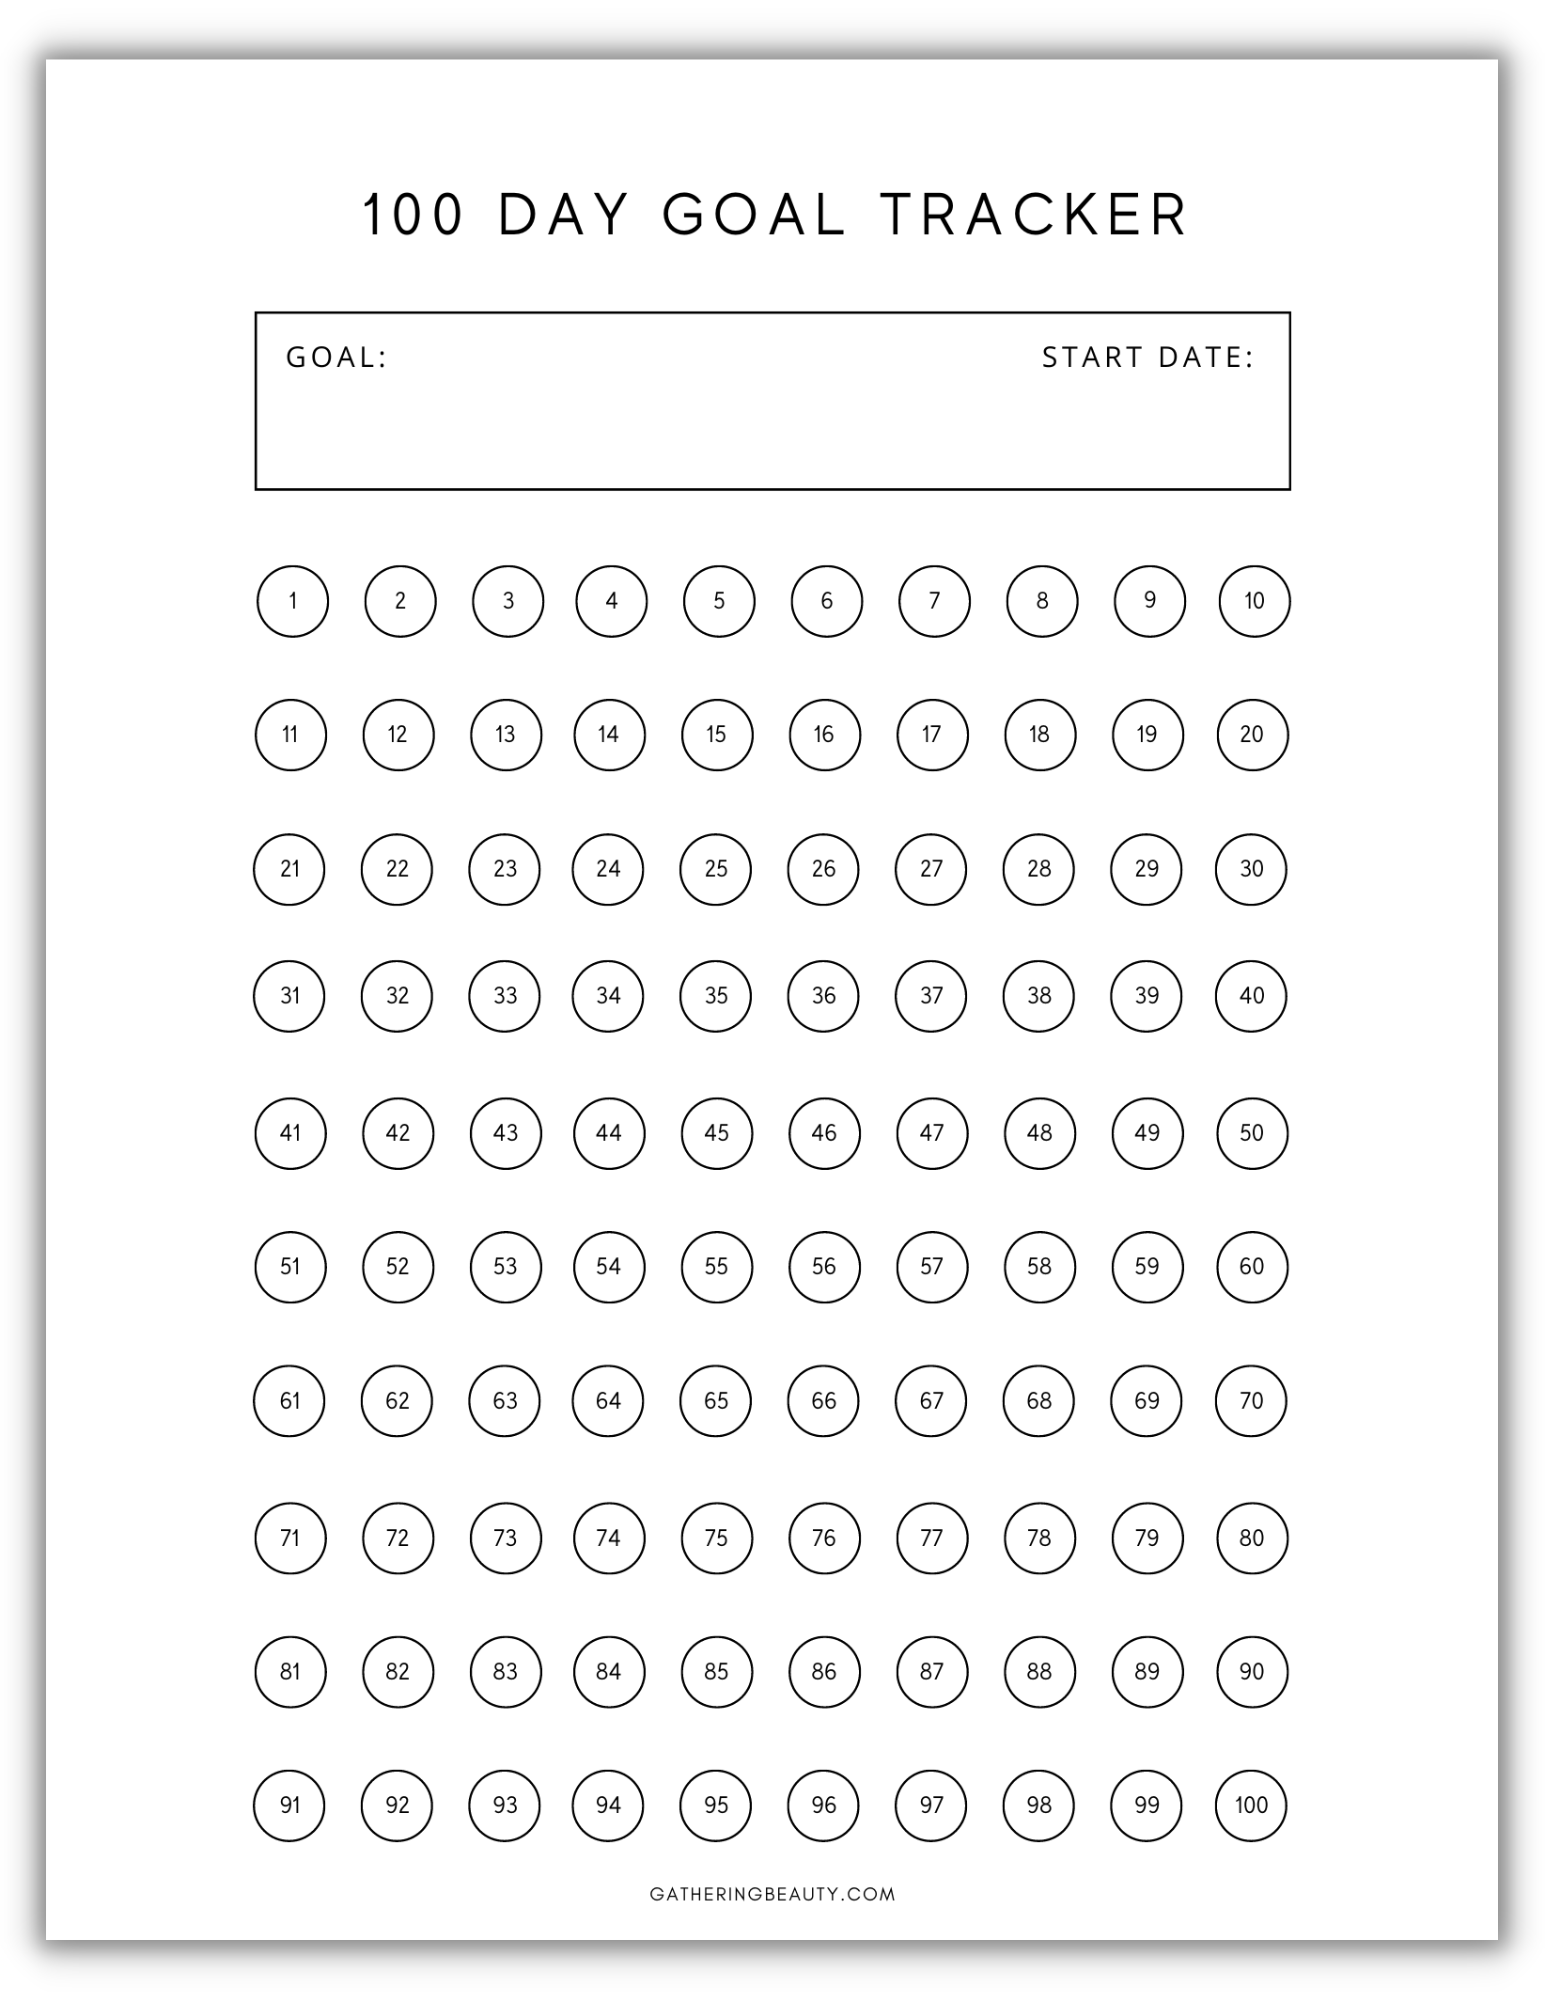 Free Printable 100 Day Goal Tracker Gathering Beauty